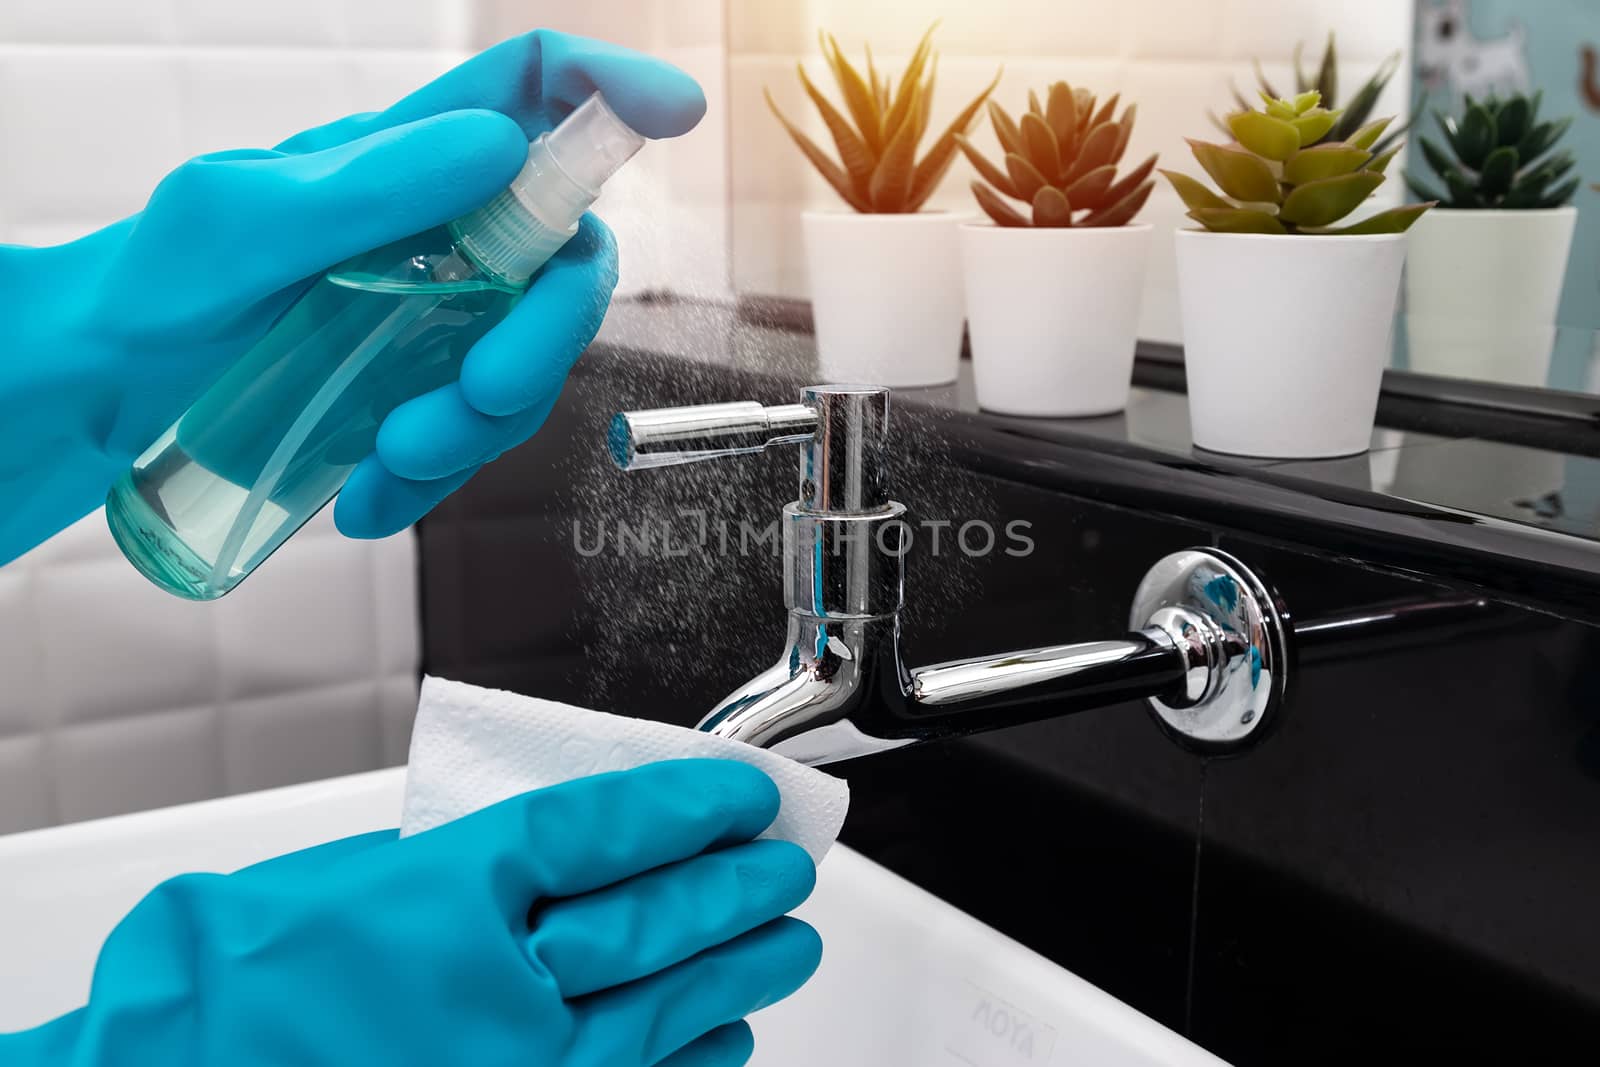 disinfect, sanitize, hygiene care. cleaning staff using alcohol spray on faucet , hydrant and frequently touched area for cleaning and prevention of germs spreading during infections of COVID-19